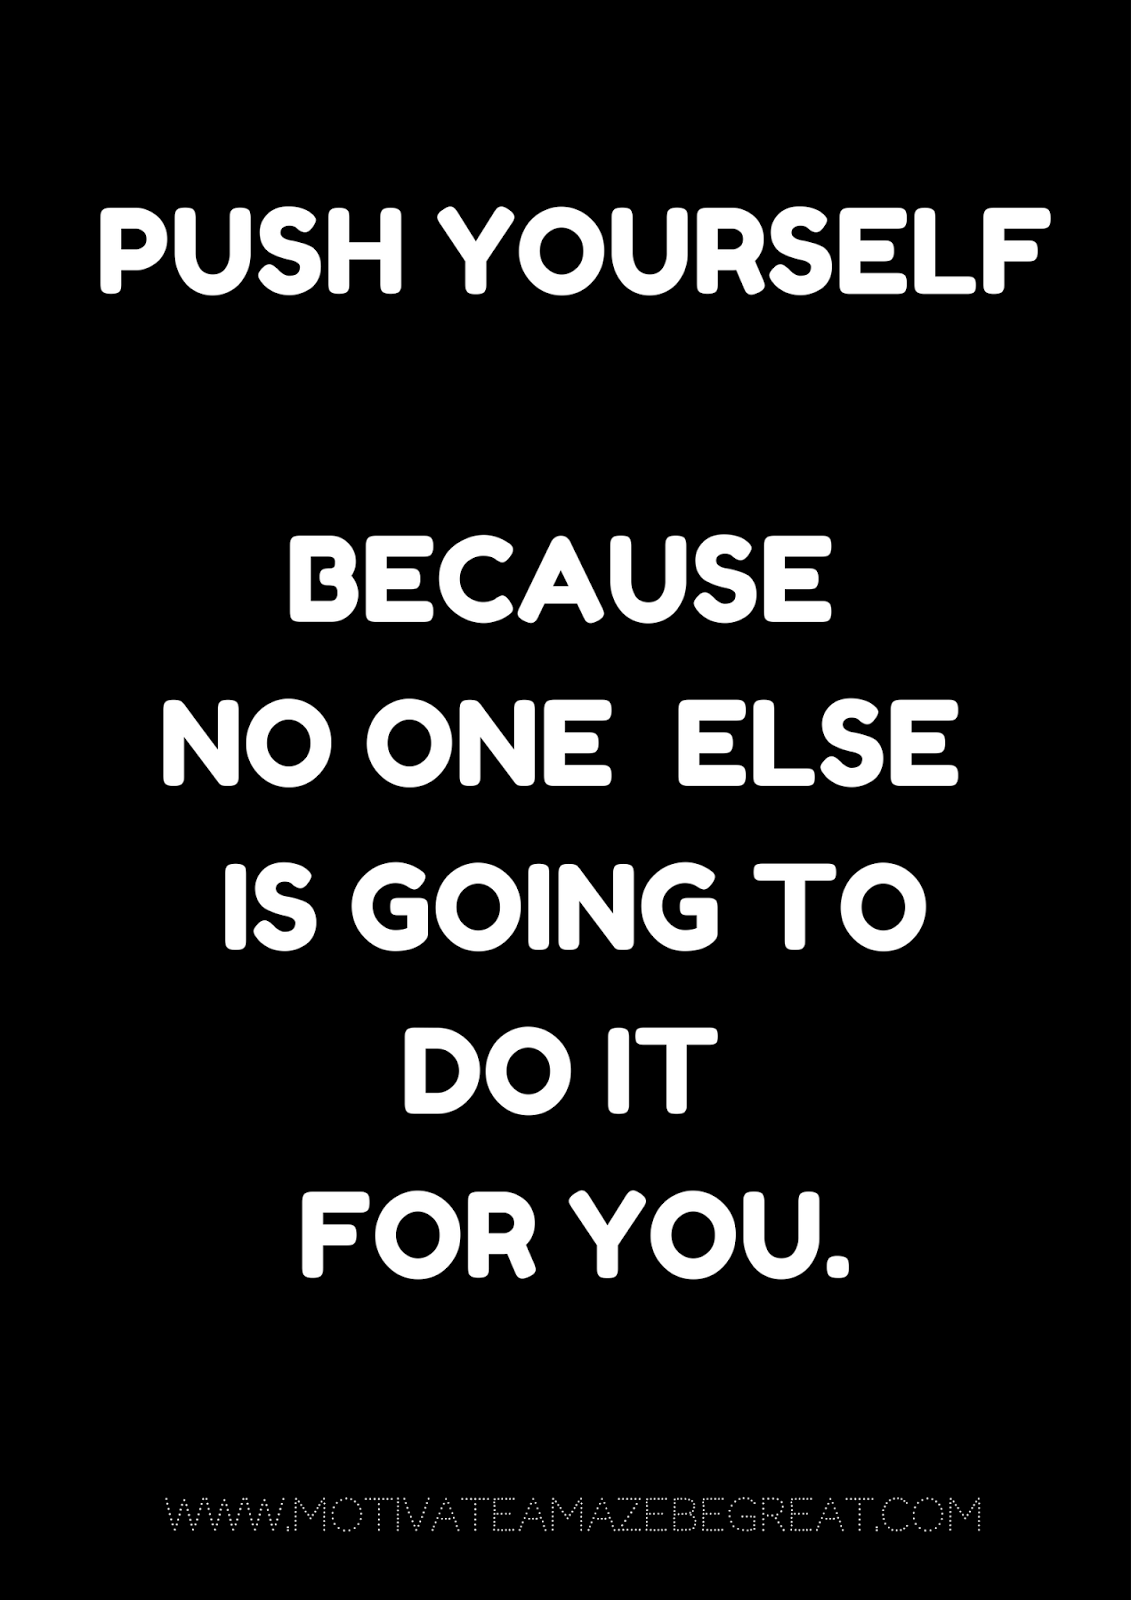 27 Self Motivation Quotes And Posters For Success "Push yourself because no one else